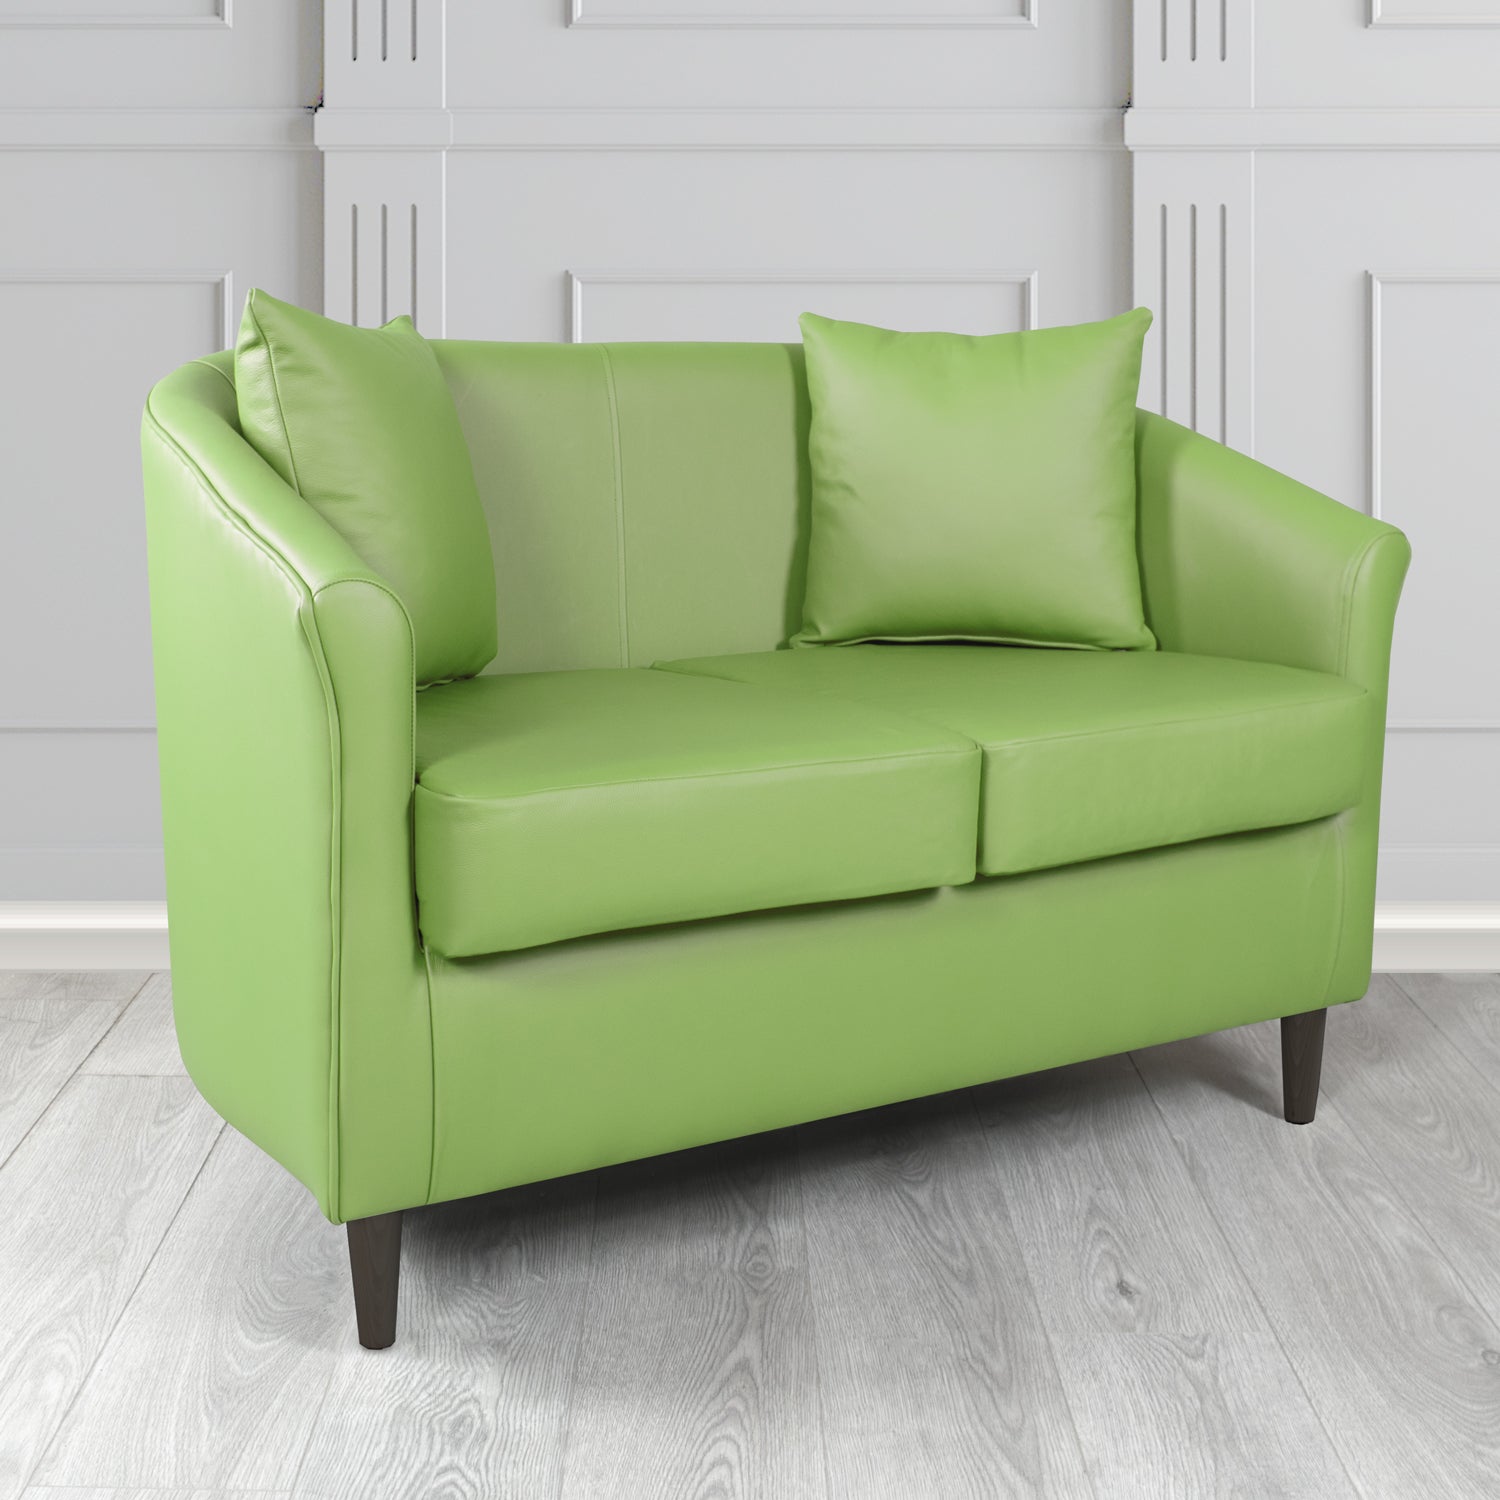 St Tropez Shelly Pea Green Crib 5 Genuine Leather 2 Seater Tub Sofa with Scatter Cushions - The Tub Chair Shop